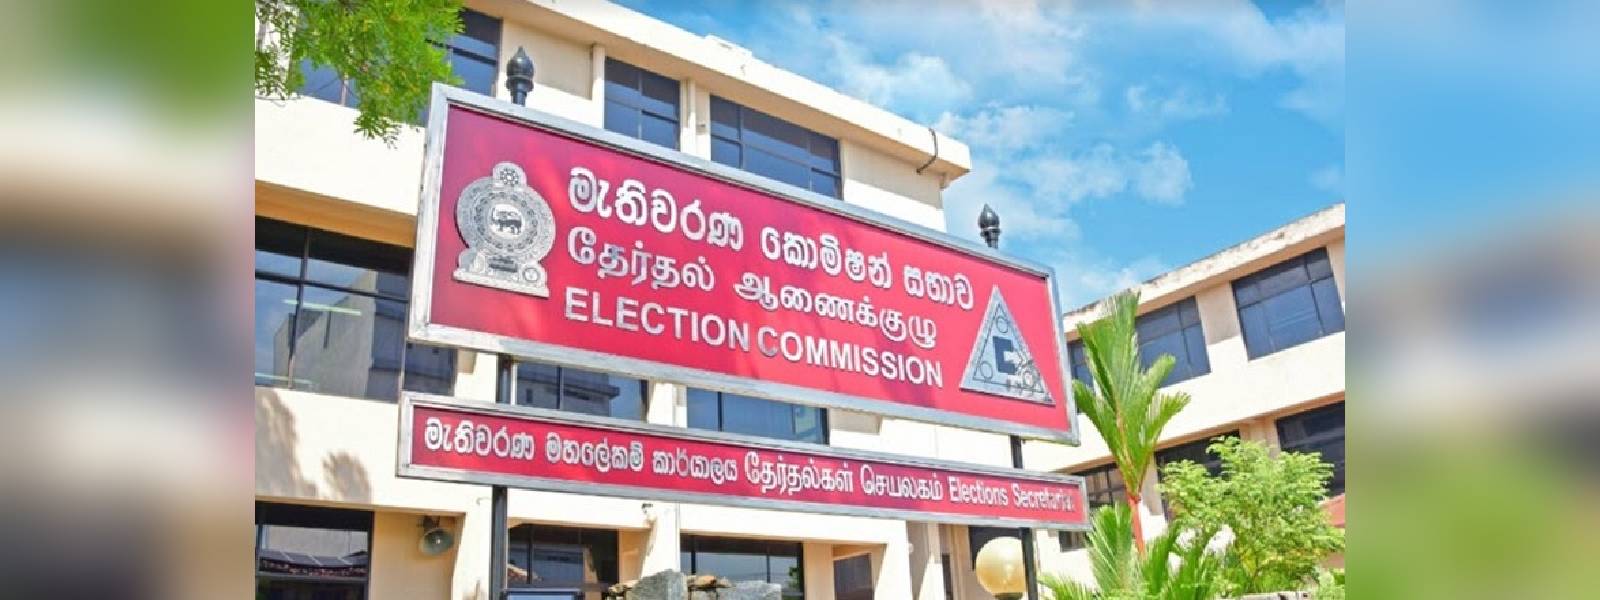 ECSL can call for local elections after Sept 20